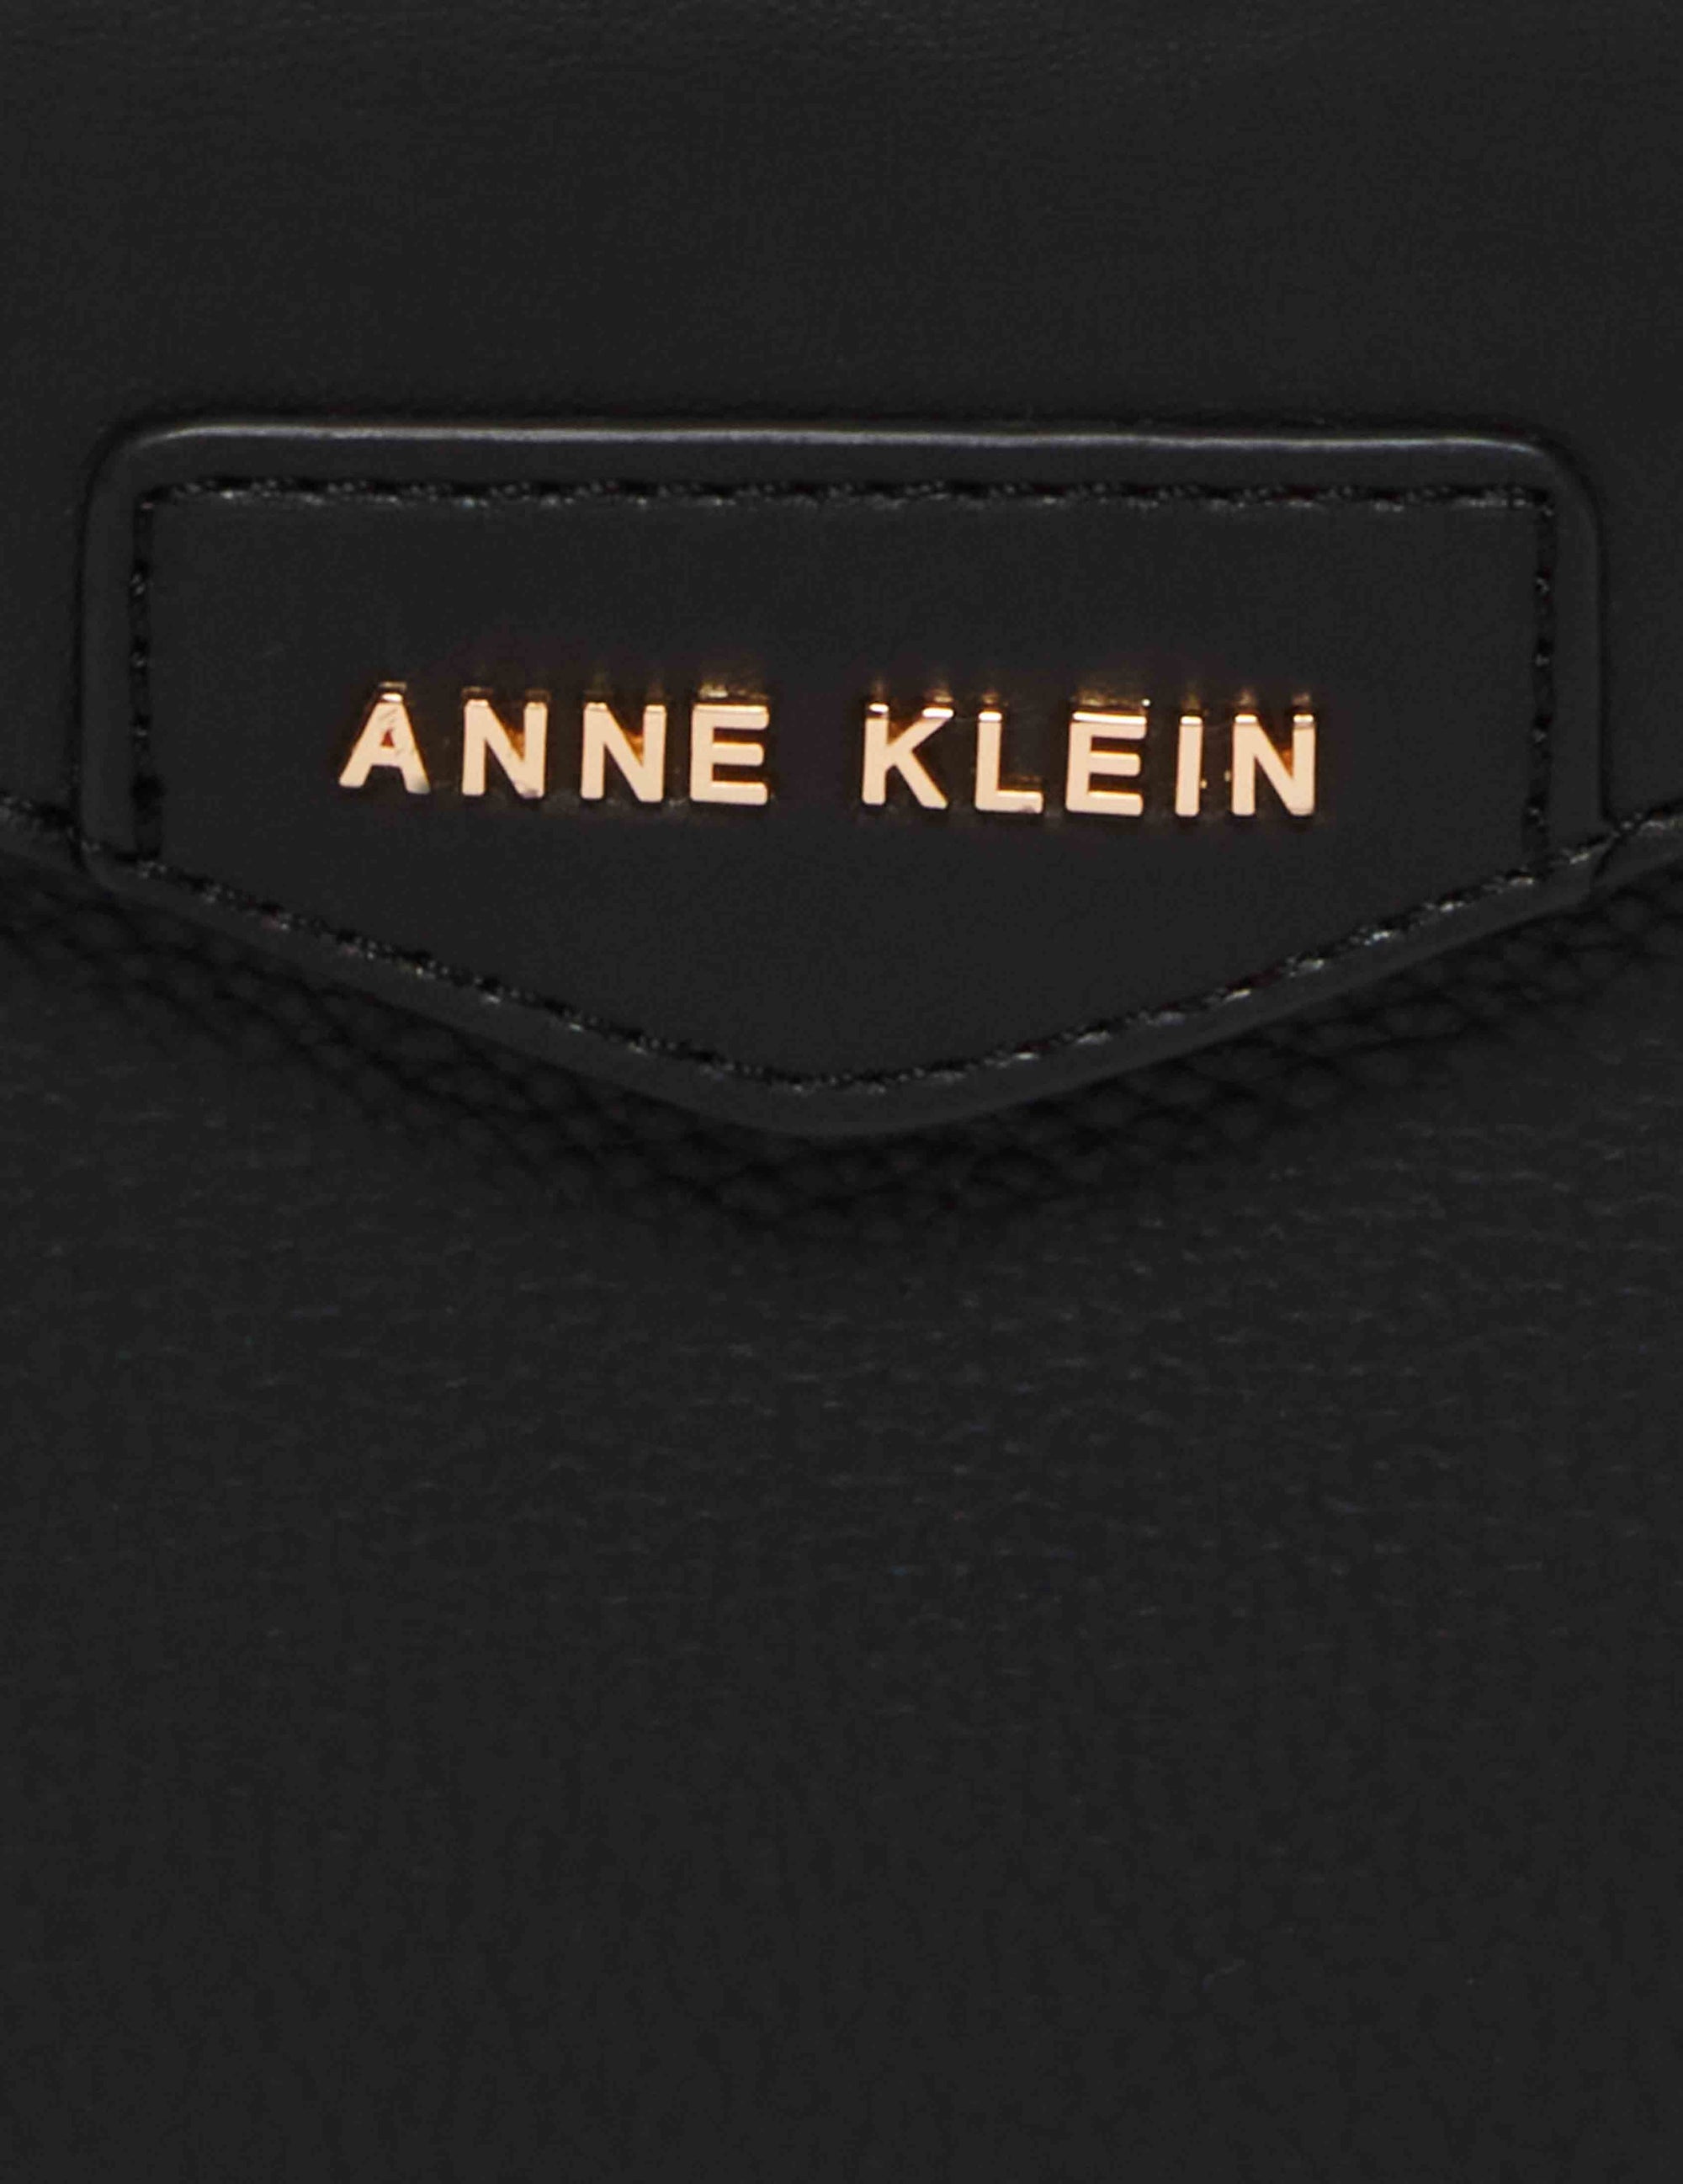 Anne Klein Convertible Shoulder Bag w/Braided Handle Saddle One Size